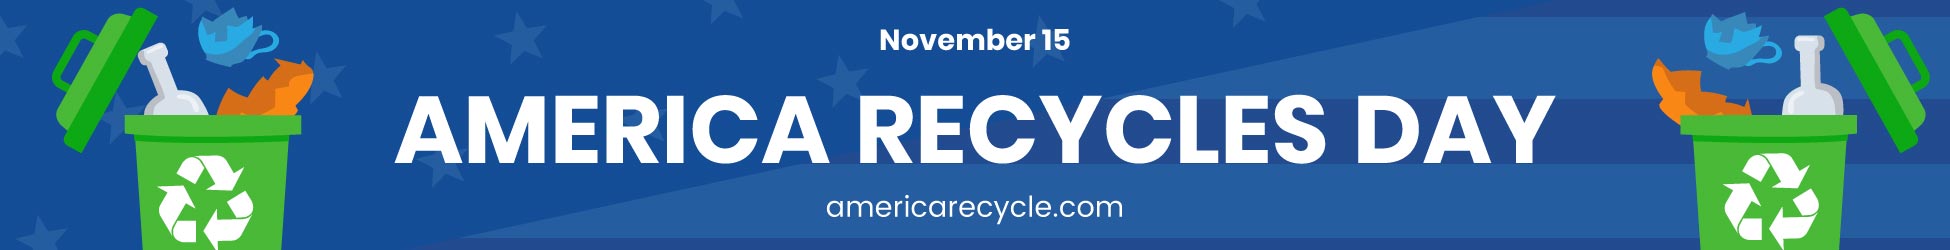 America Recycles Day Website Banner in Illustrator, PSD, EPS, SVG, JPG, PNG